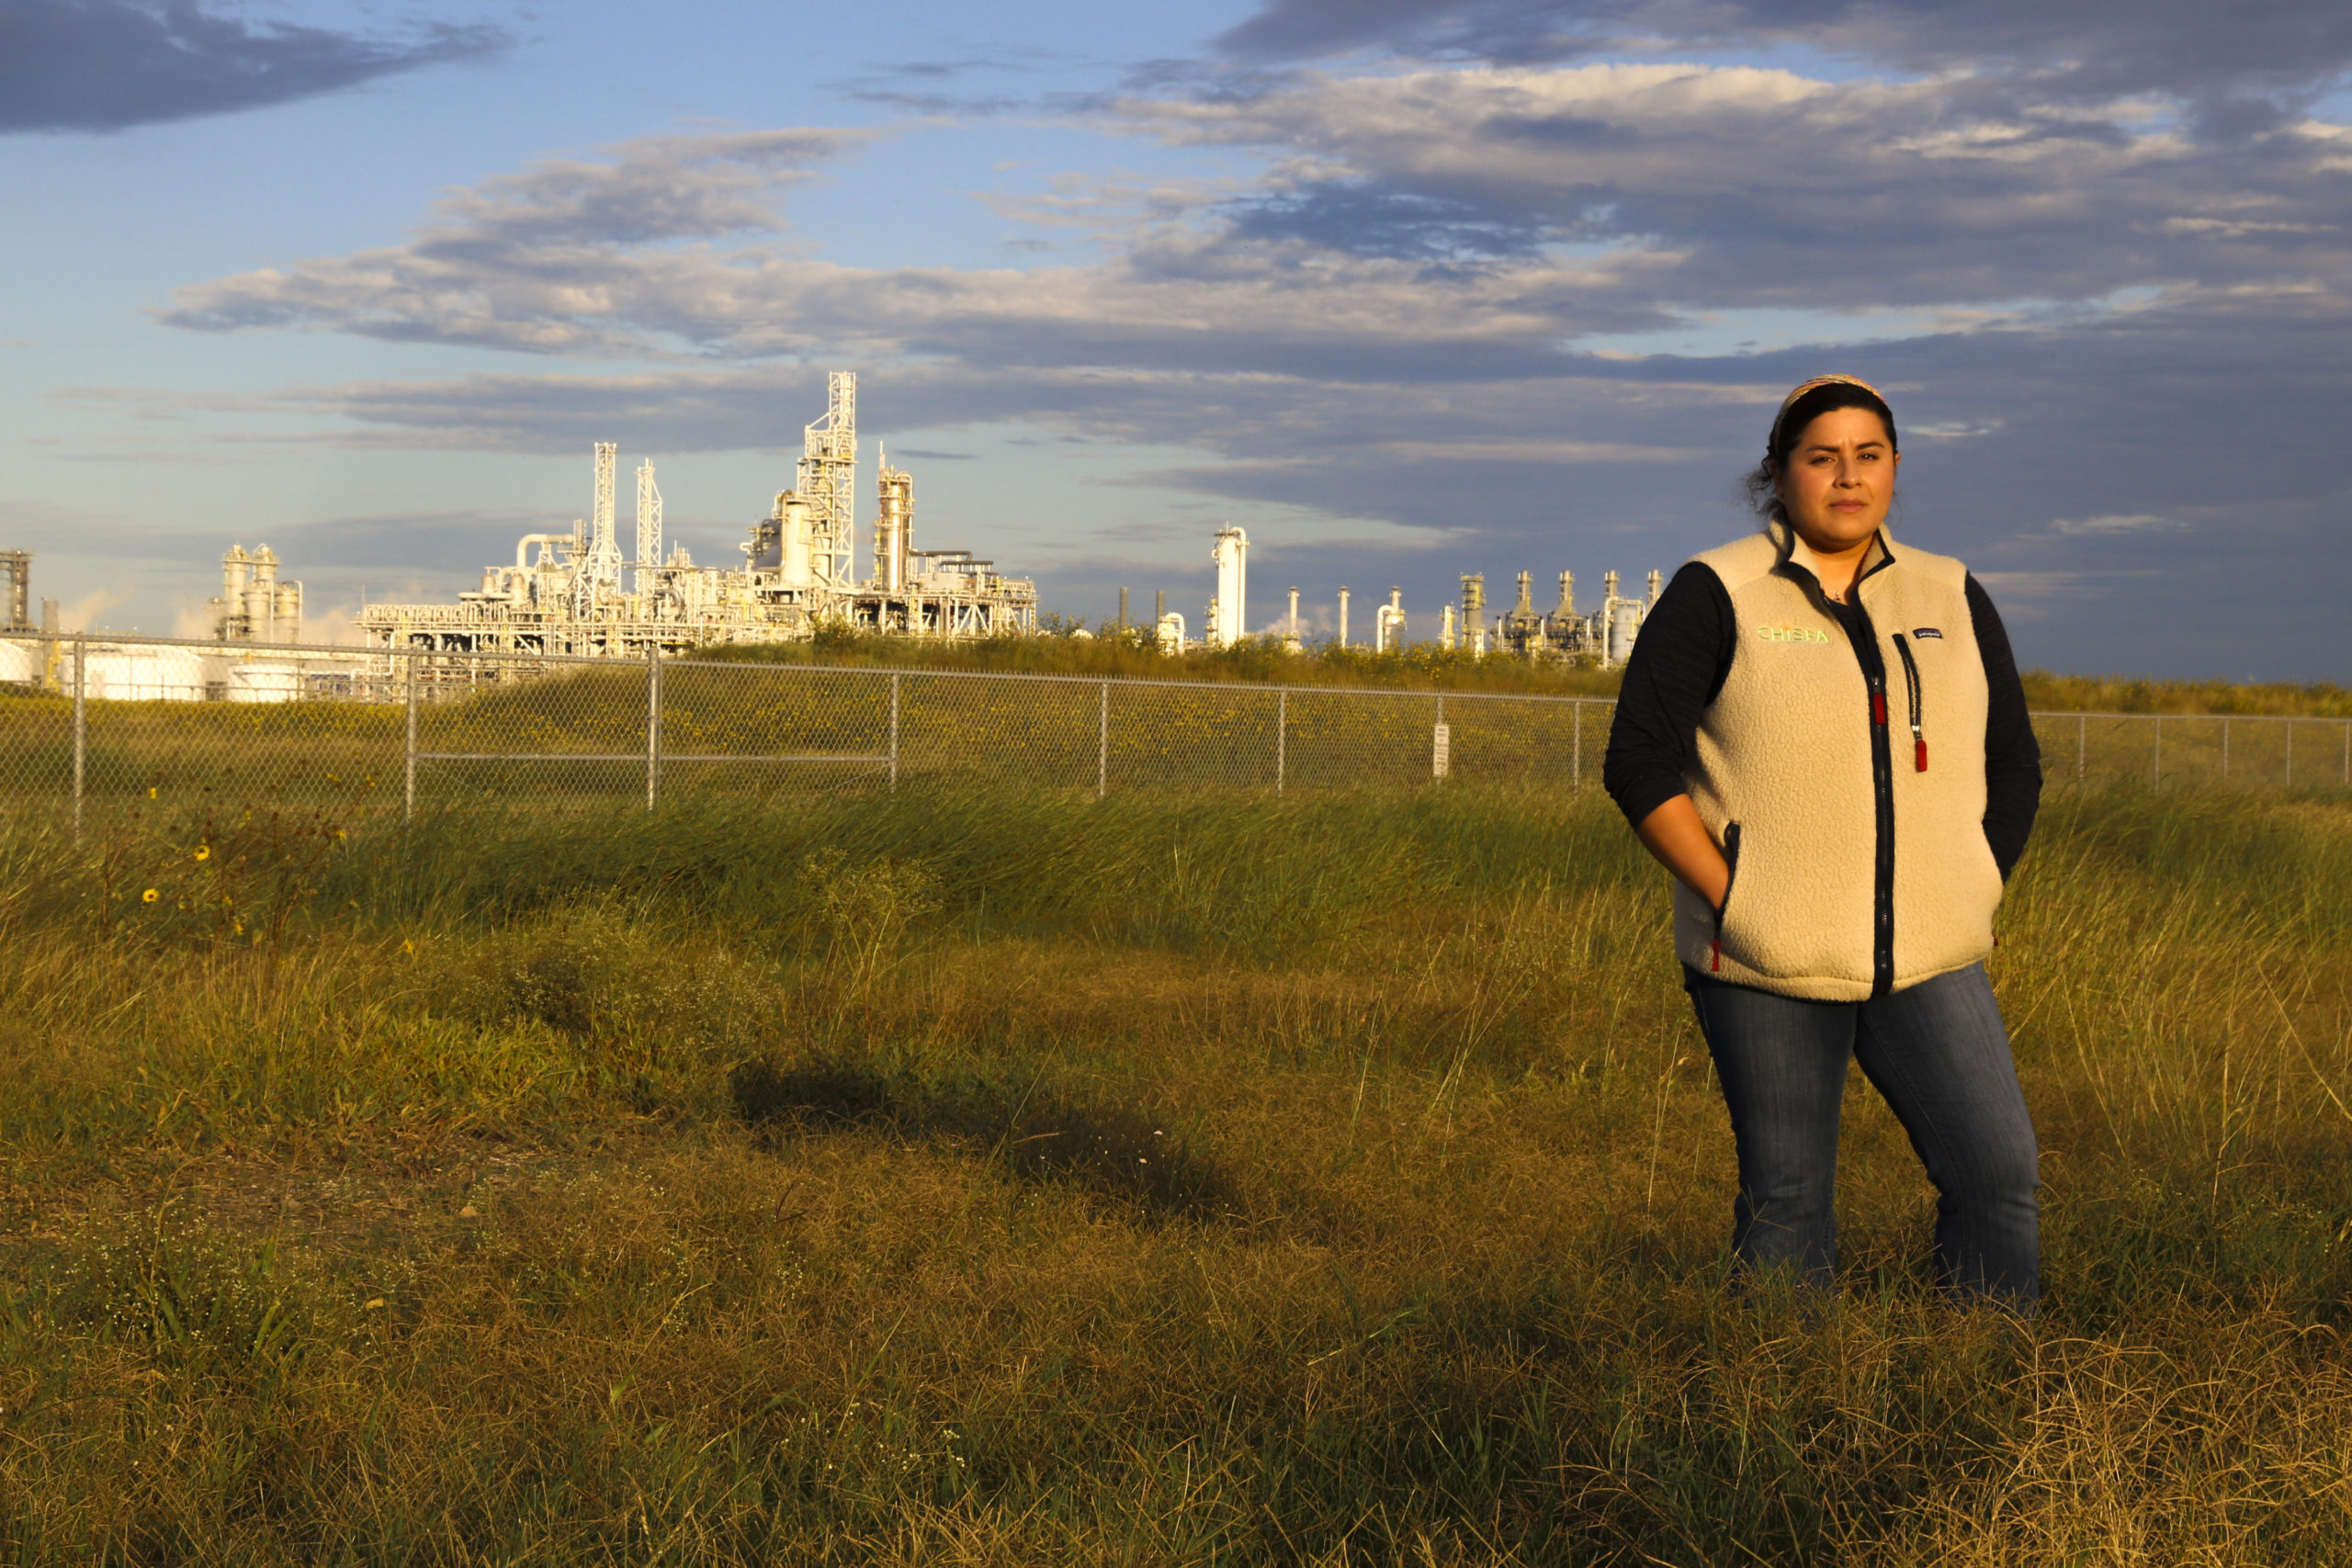 A woman stands with her hands in her pockets, wearing a jacket as she stands in a field of knee-high grass. Behind her in the distance are the industrial buildings of a plastics plant.